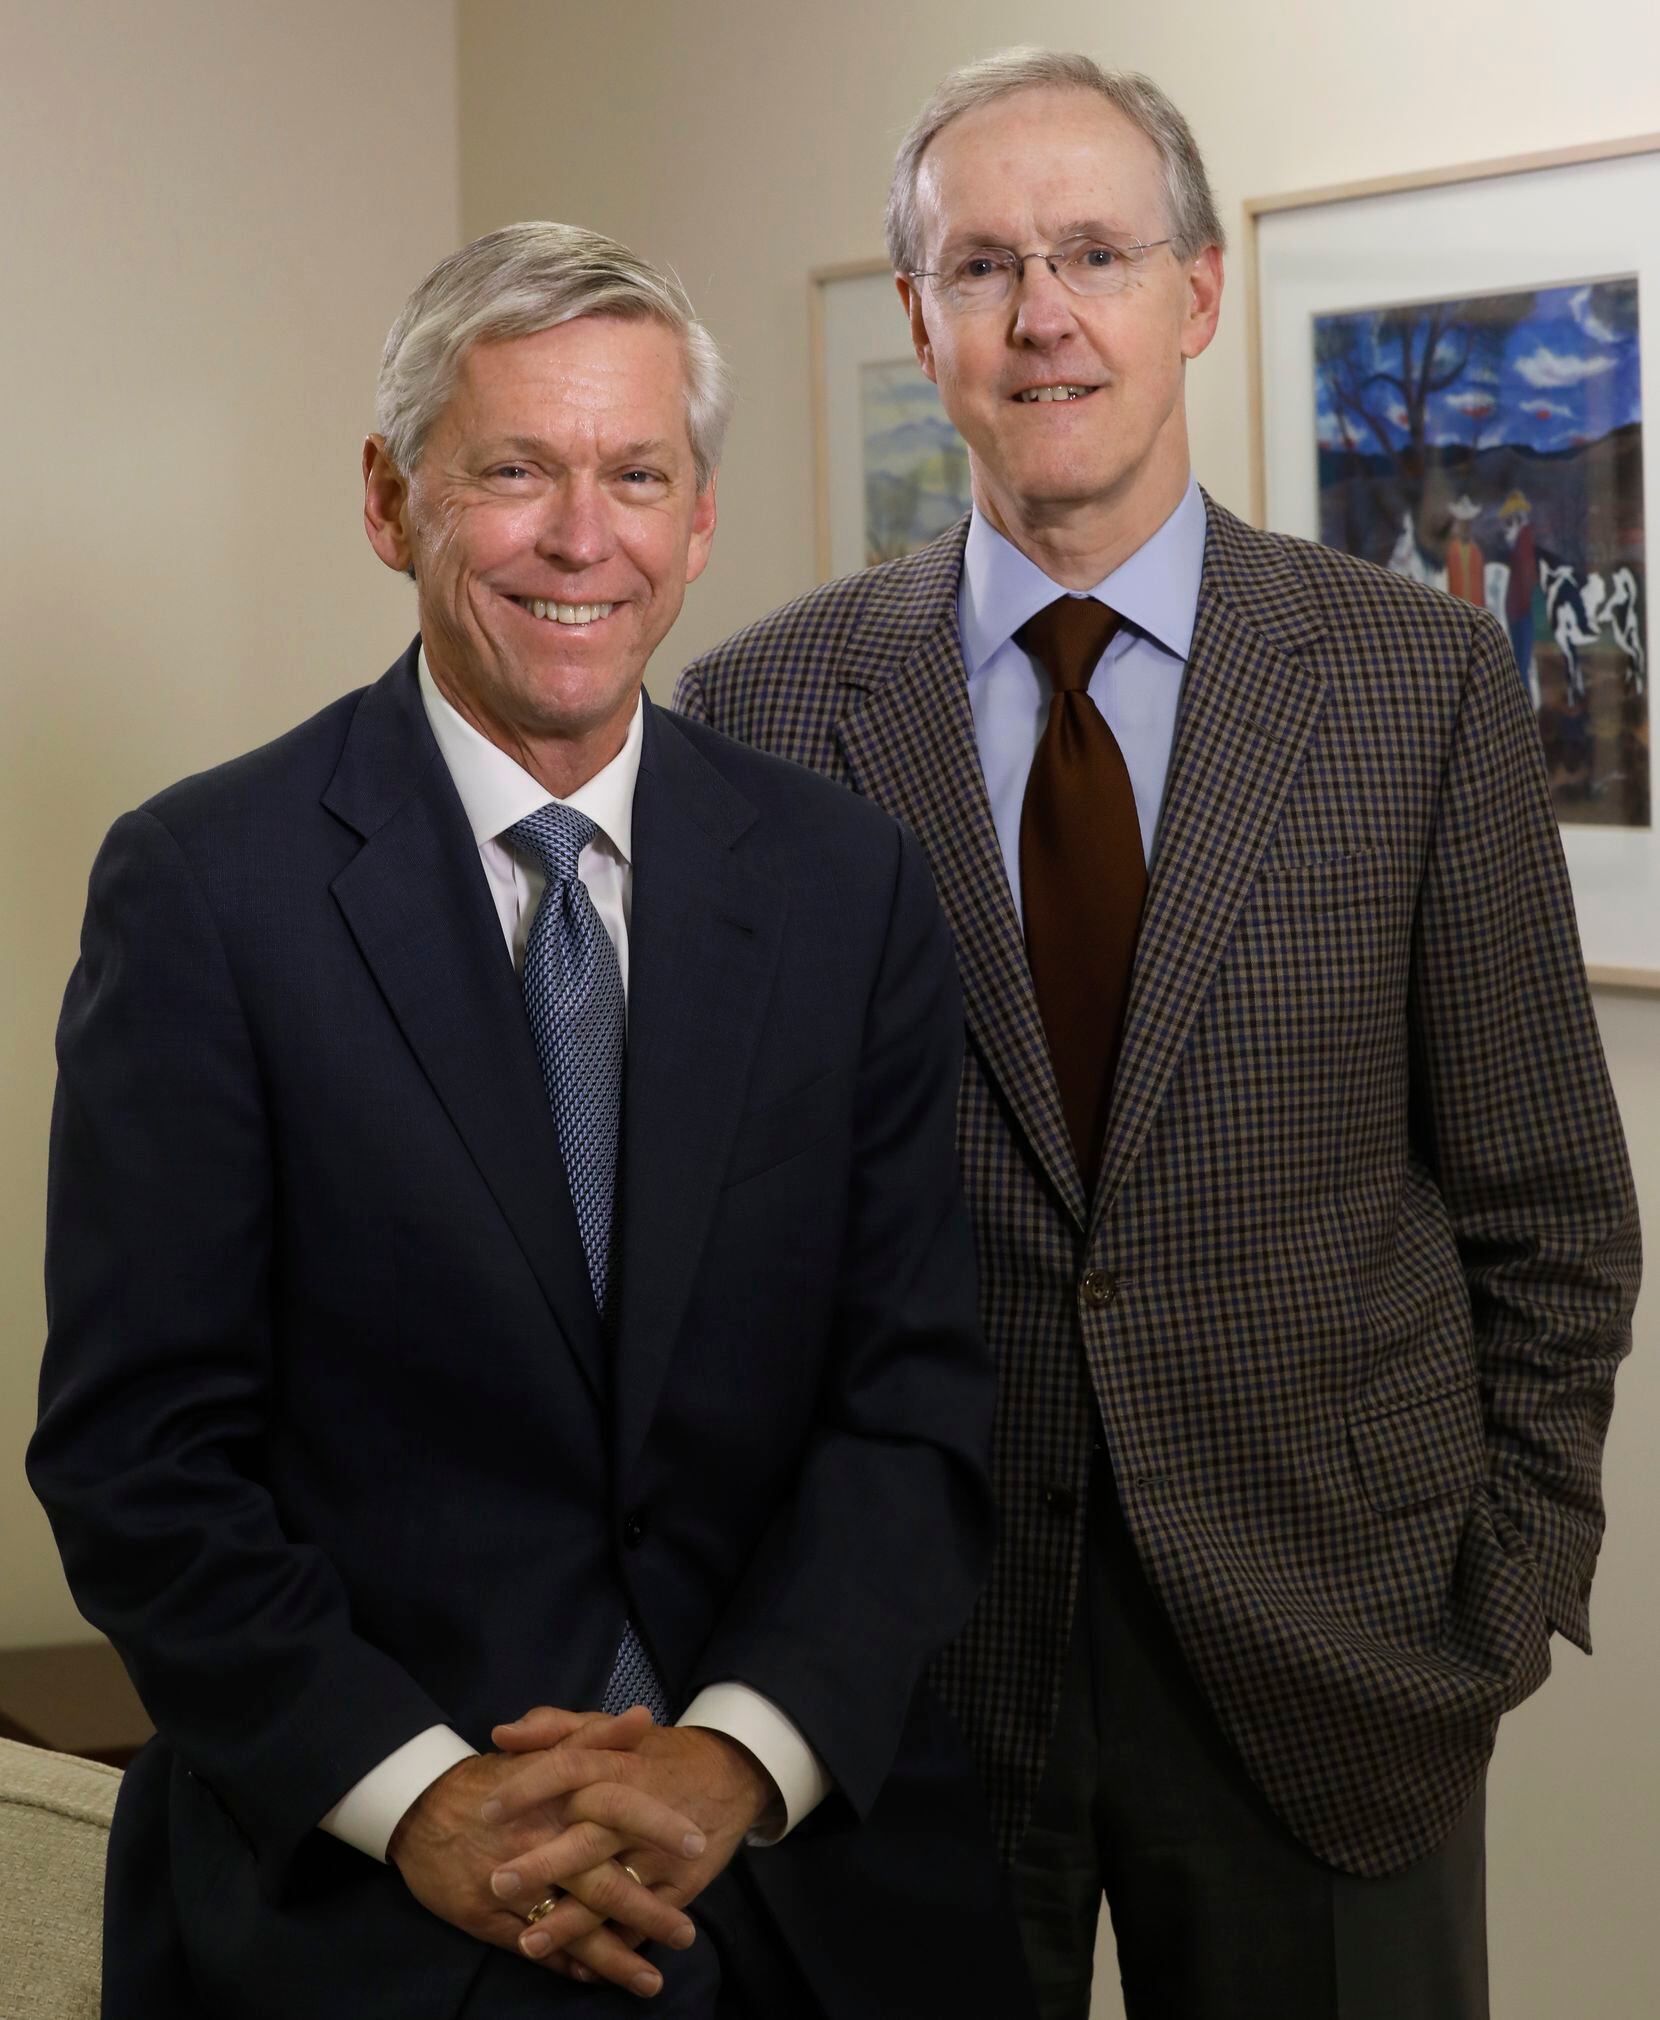 Jim Moroney (left) will turn over leadership of A. H. Belo Corporation to his predecessor...